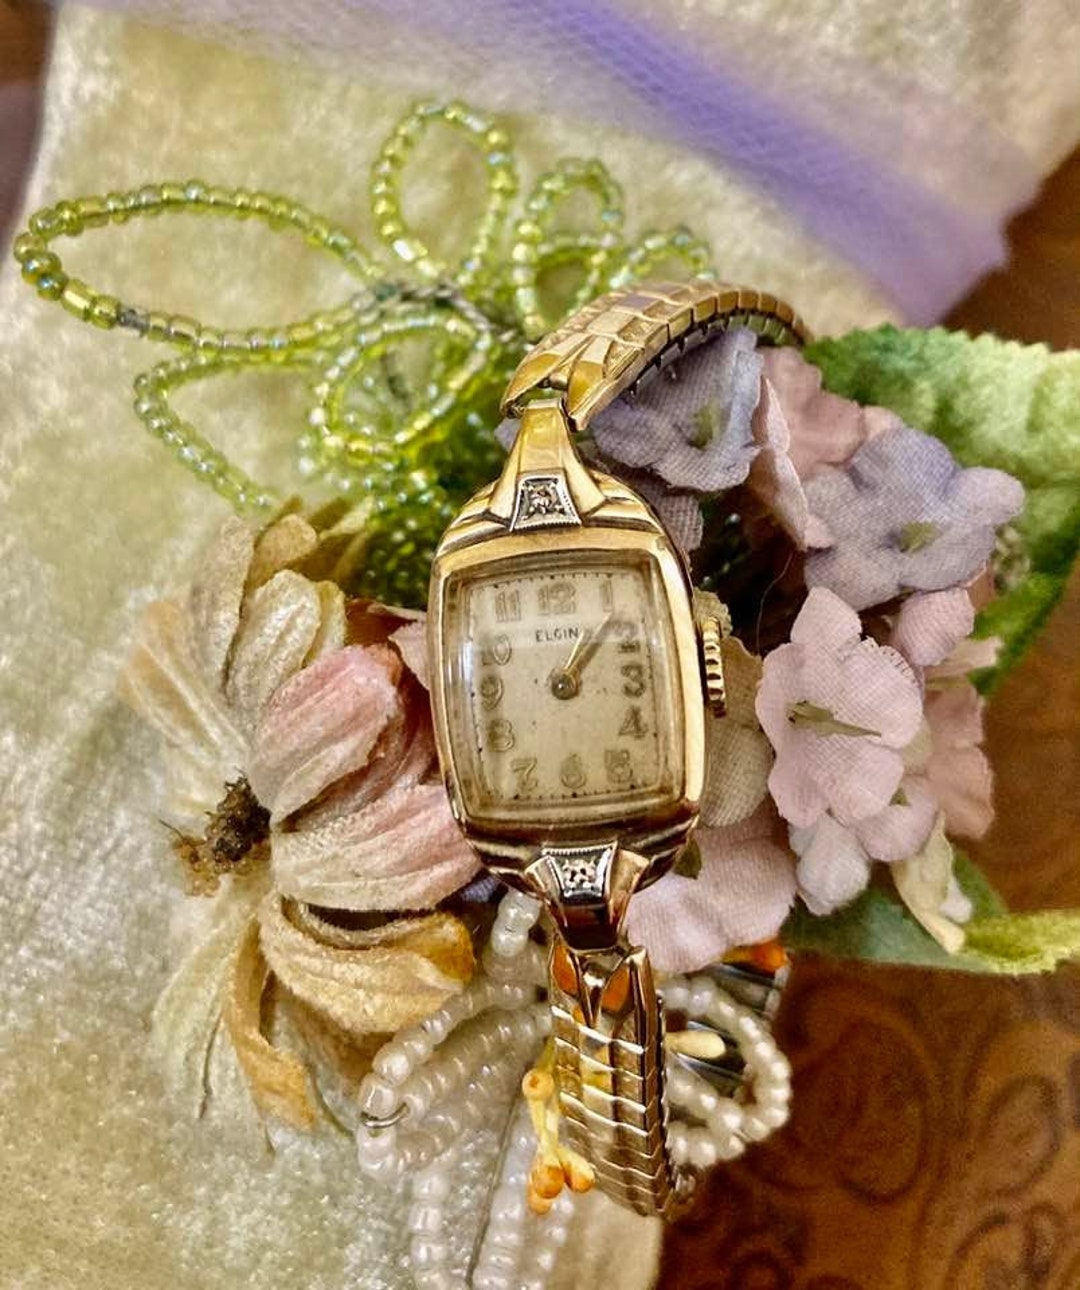 At Auction: VINTAGE GOLD FILLED JUMP RINGS WATCH JEWELRY MAKING